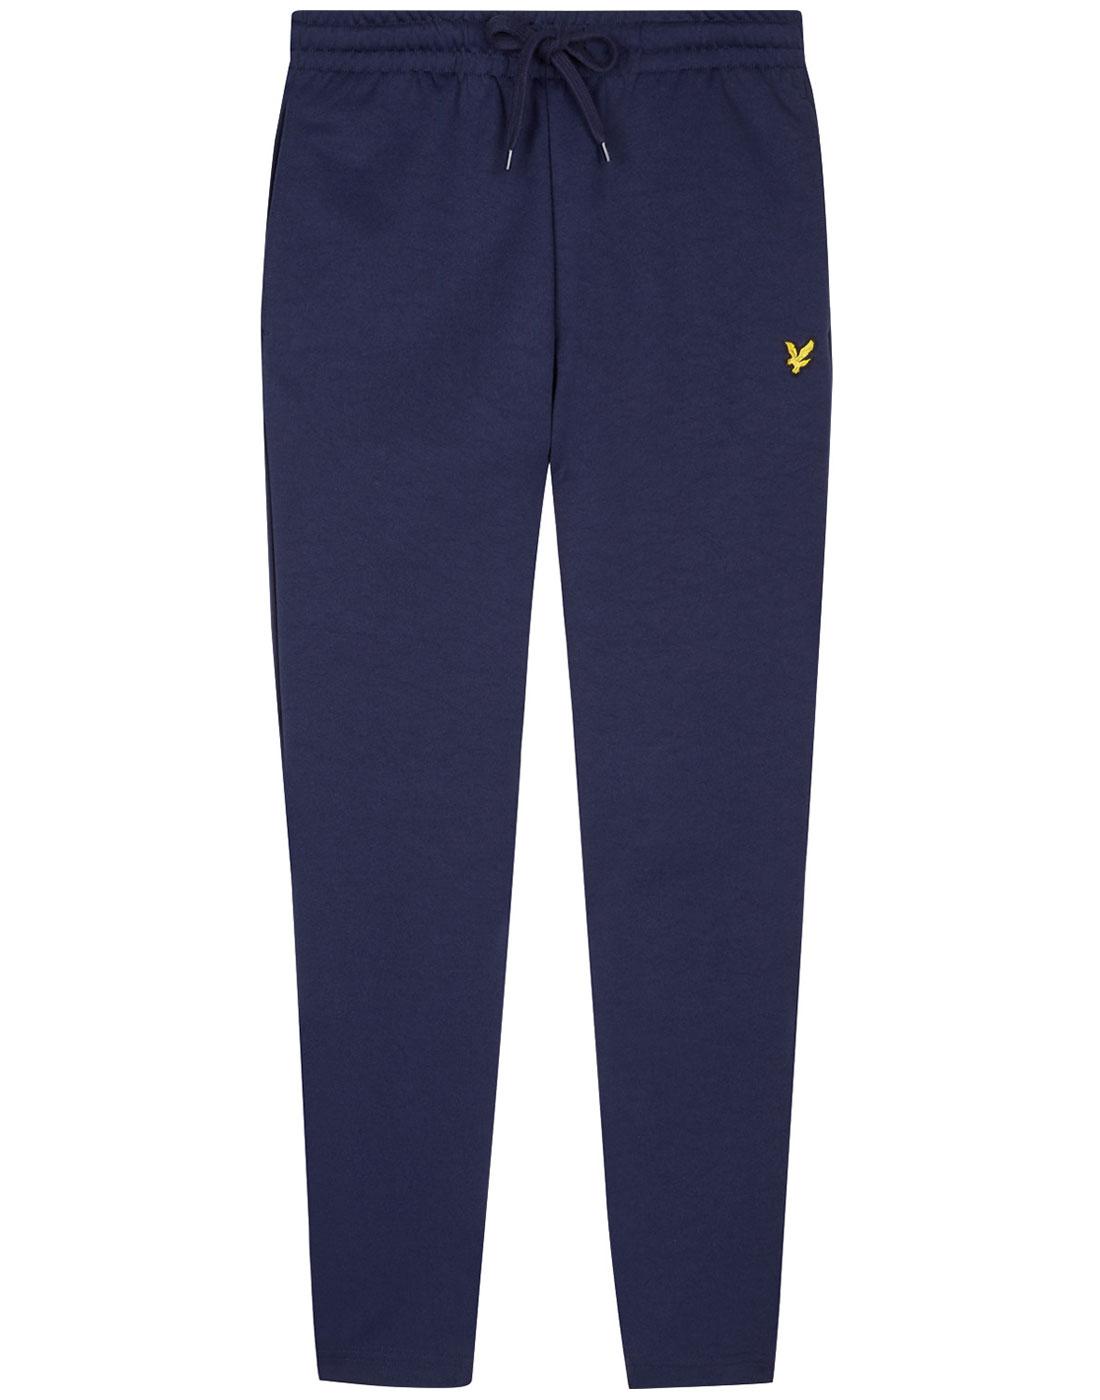 LYLE & SCOTT Retro 1980s Tricot Tracksuit Bottoms in Navy